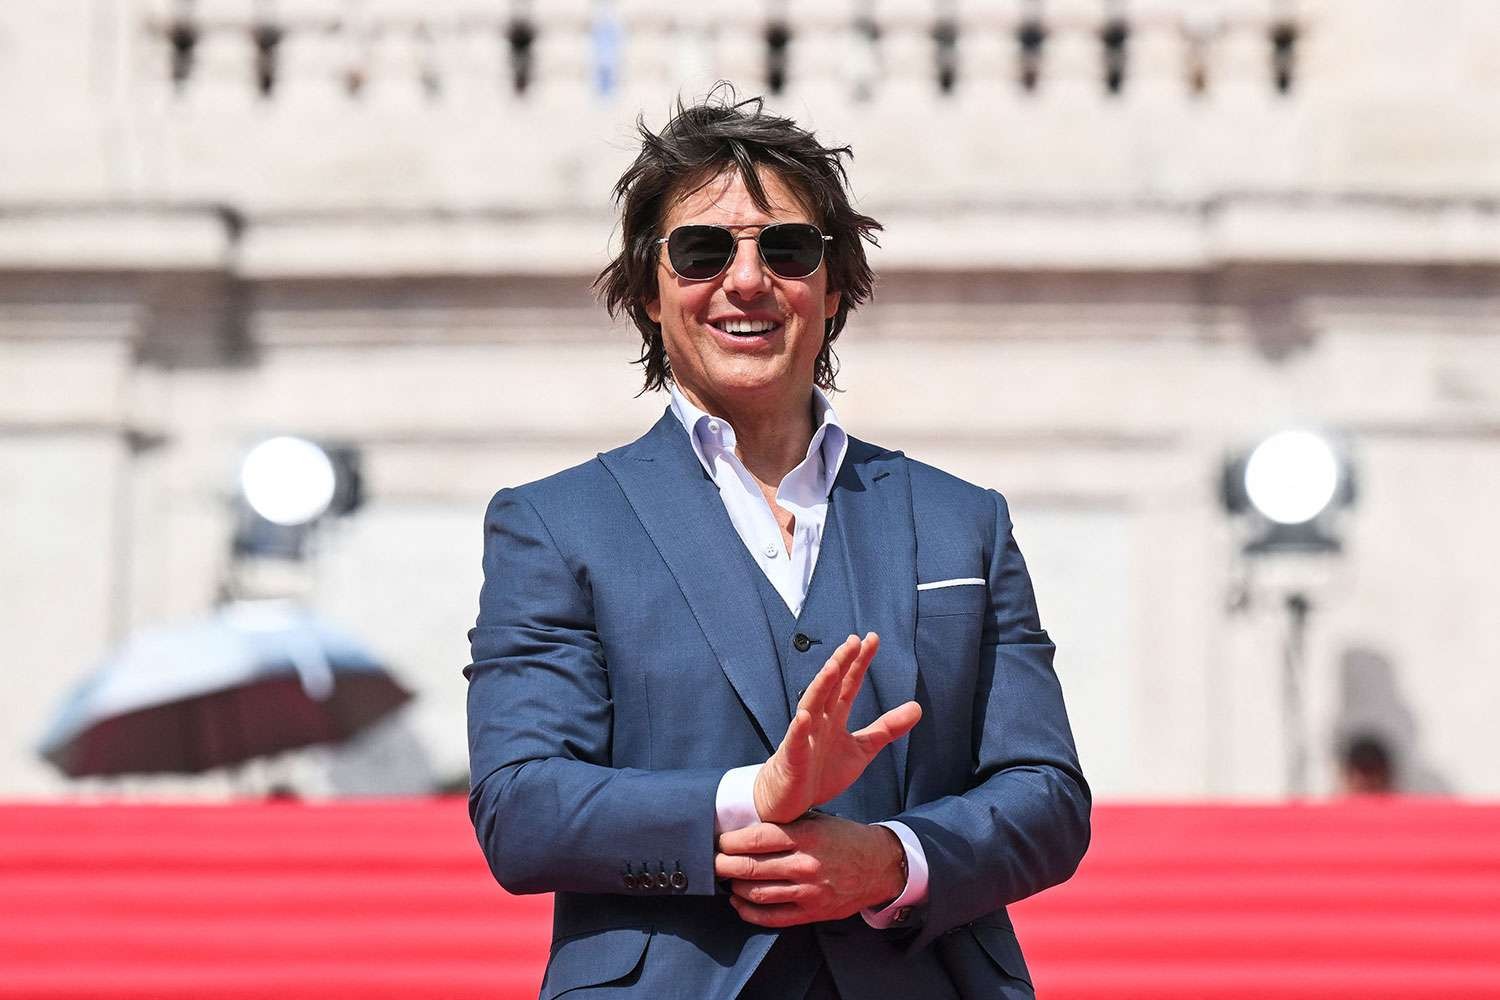 Tom Cruise thanks fan for Mission Impossible 7